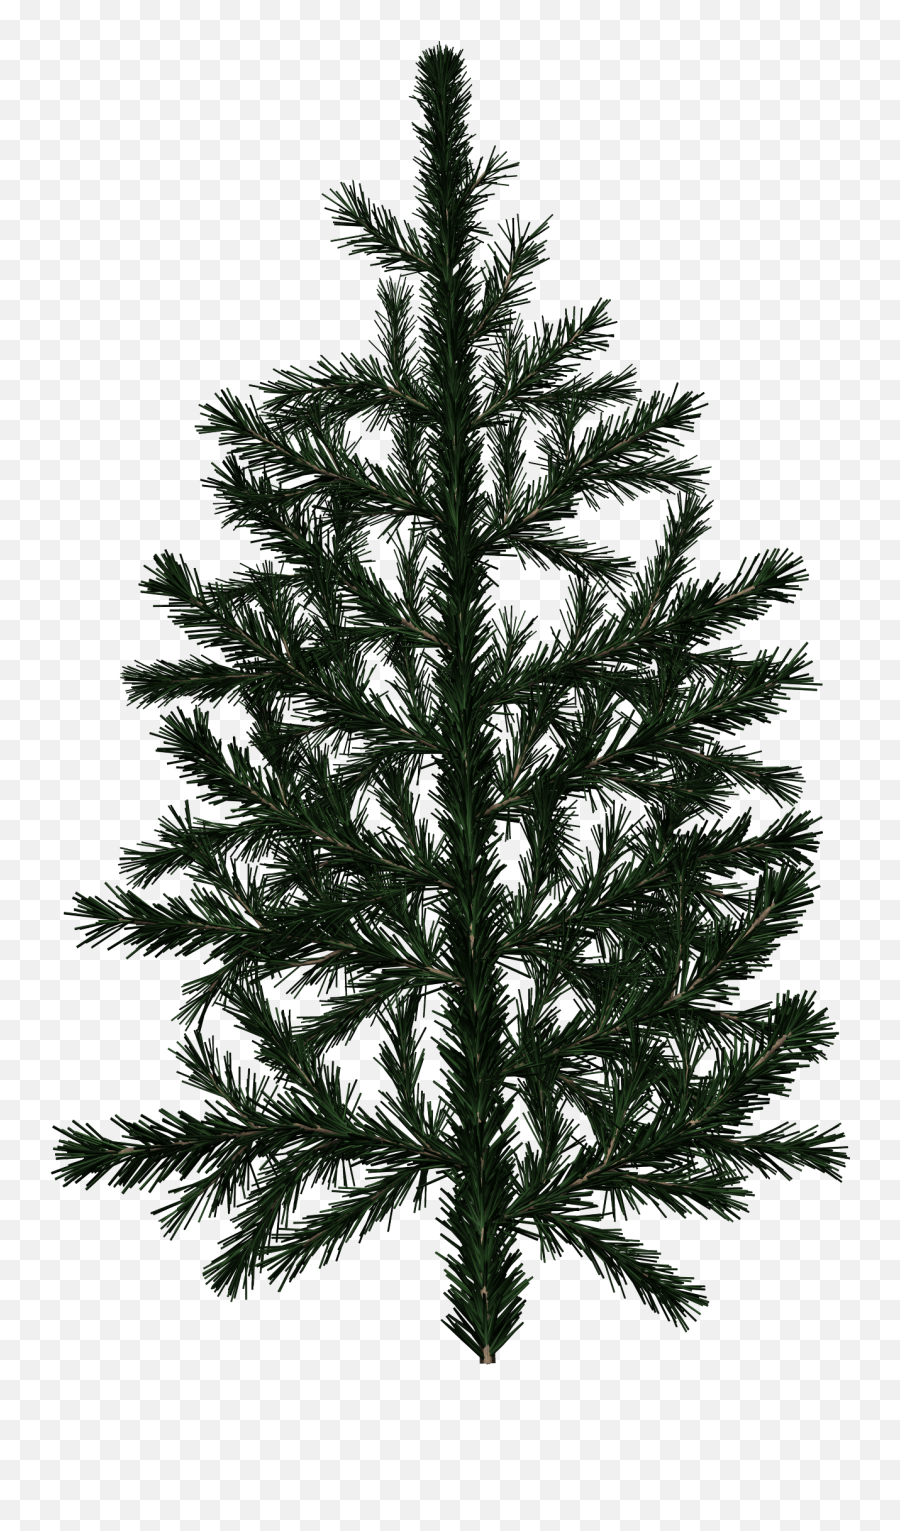 Pine Tree Branch Texture - Pine Branch Texture Png,Pine Branch Png